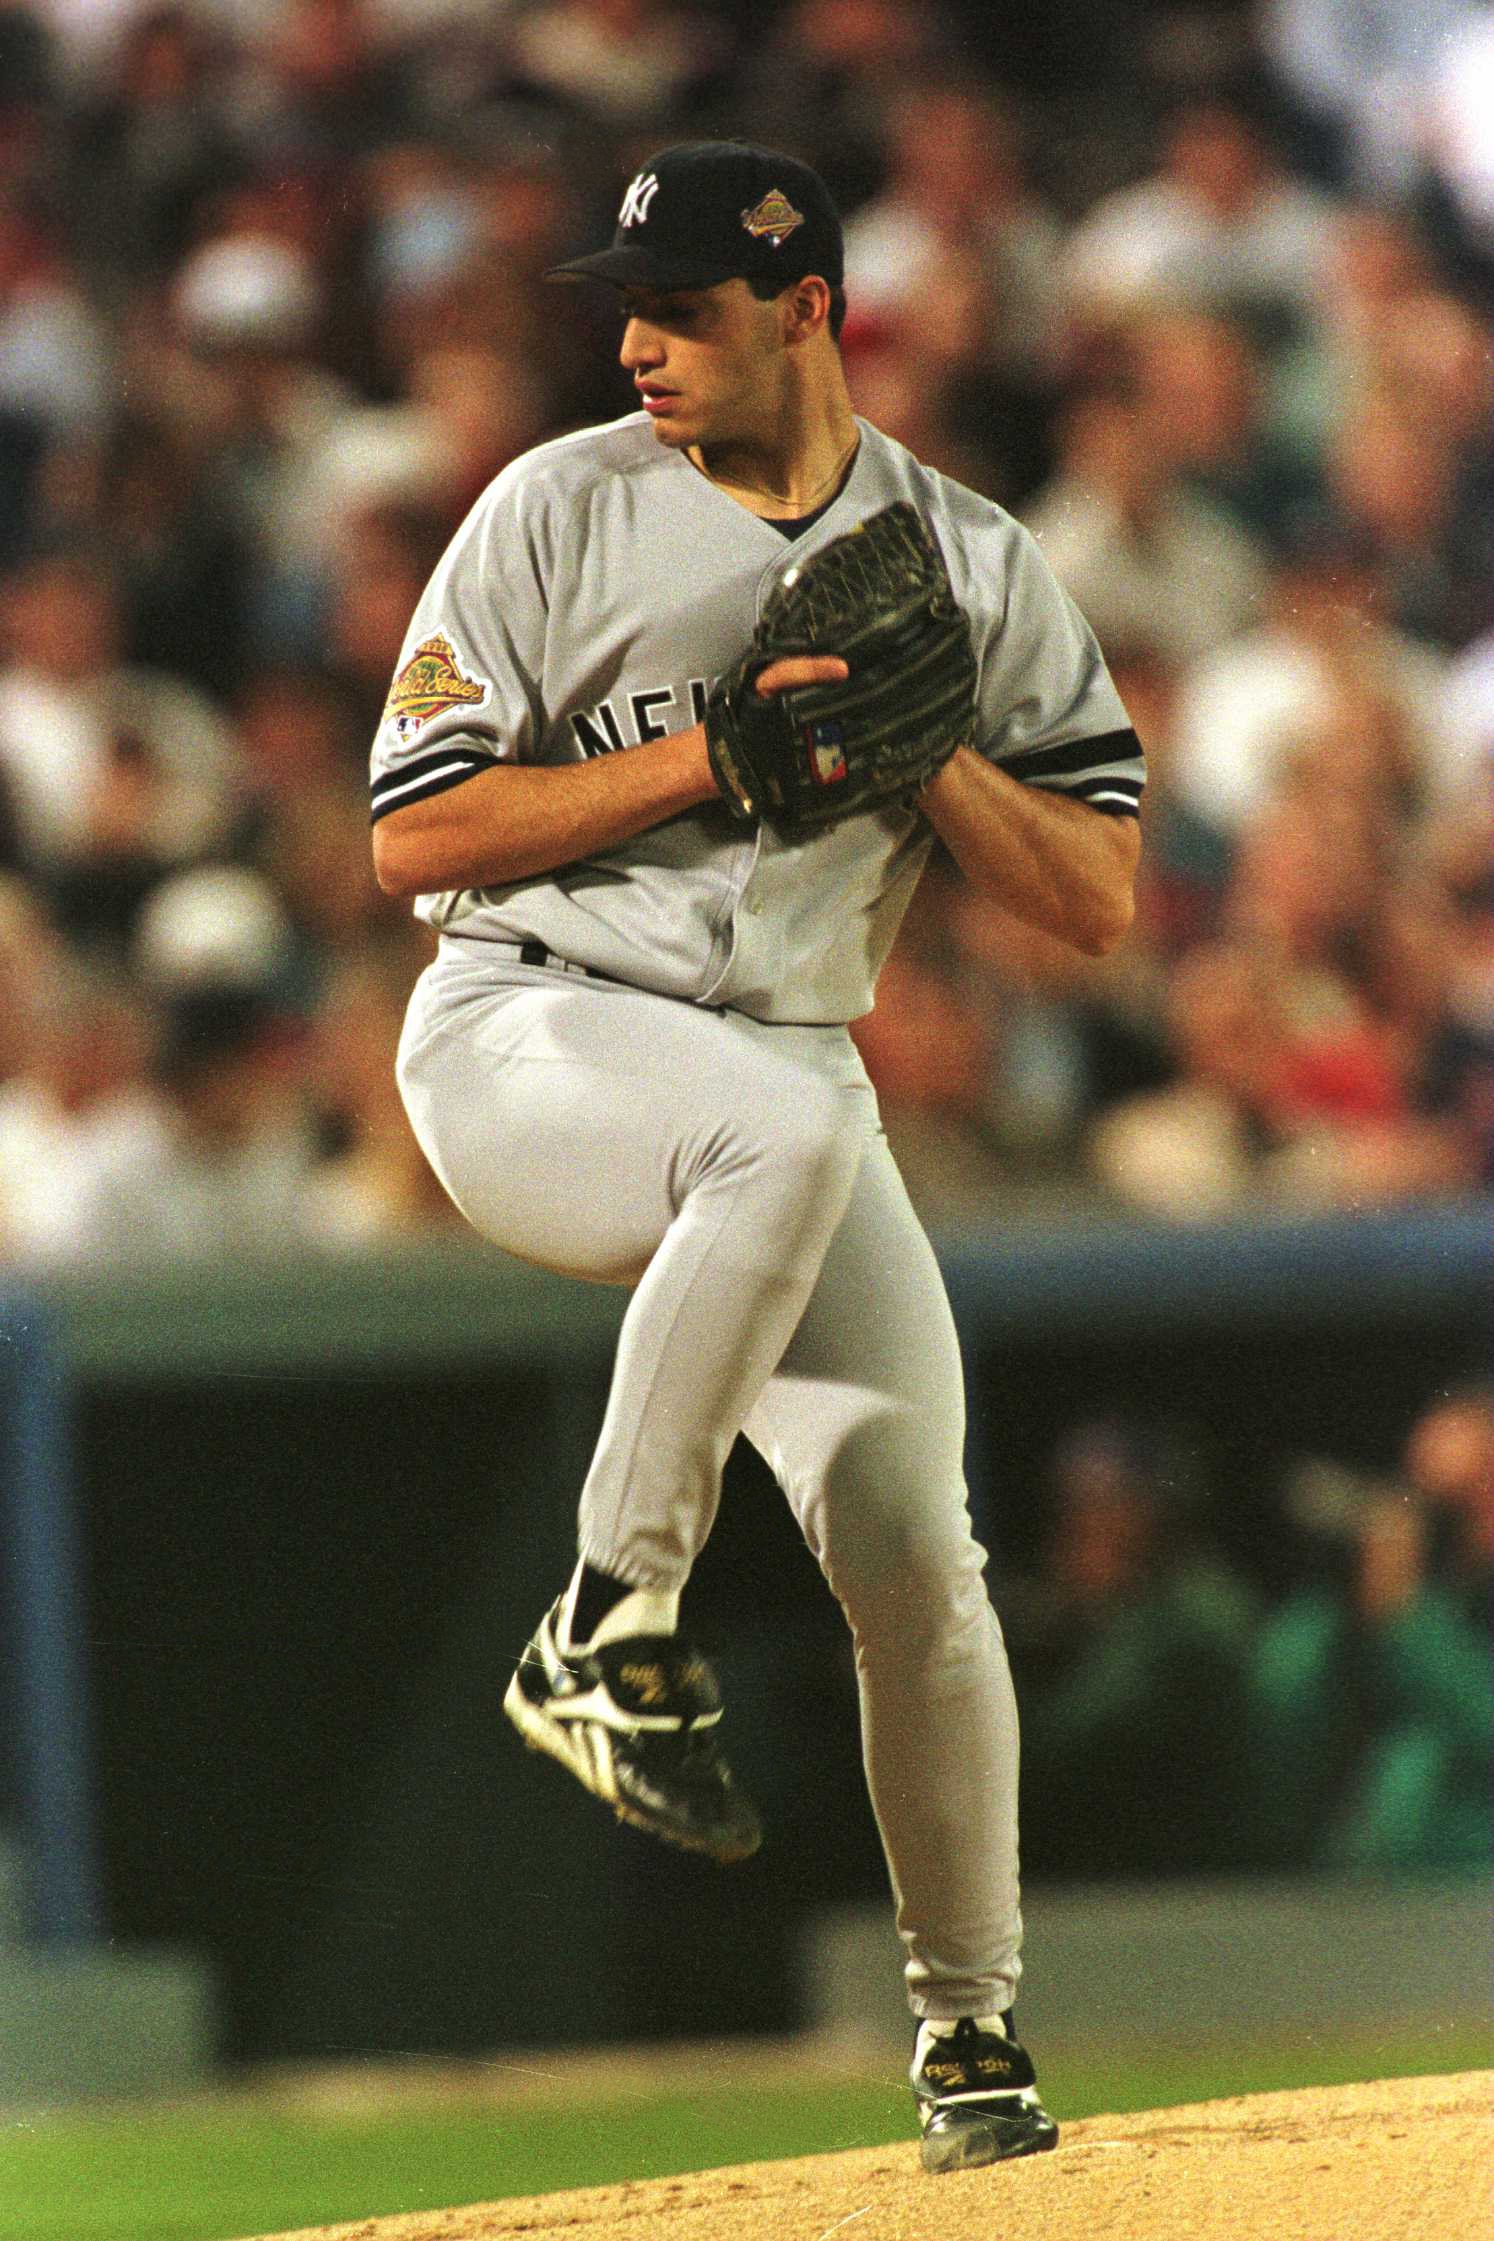 Revisiting Andy Pettitte's gem in game two of the 2003 World